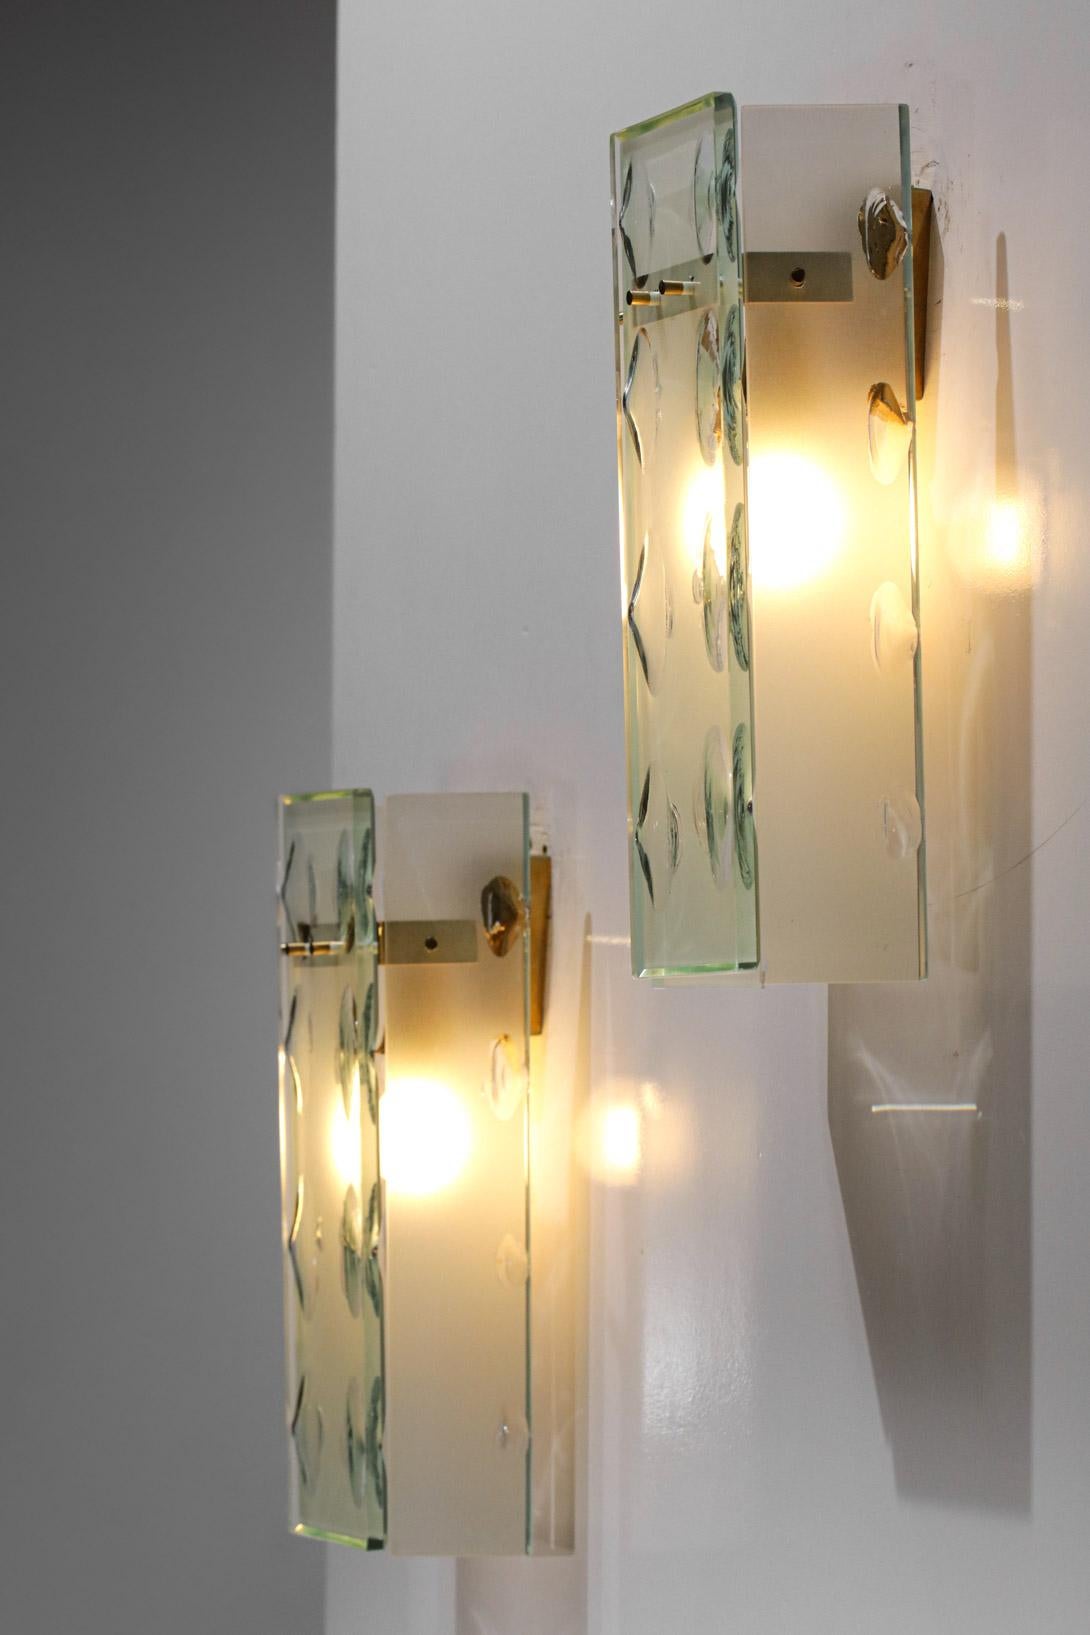 Imposing pair of Italian sconces in the style of Max Ingrand's work from the 60s. Brass structure, diffuser composed of three frosted glass slabs and engraved for a decorative effect even when turned off. Very nice vintage condition, recommended LED